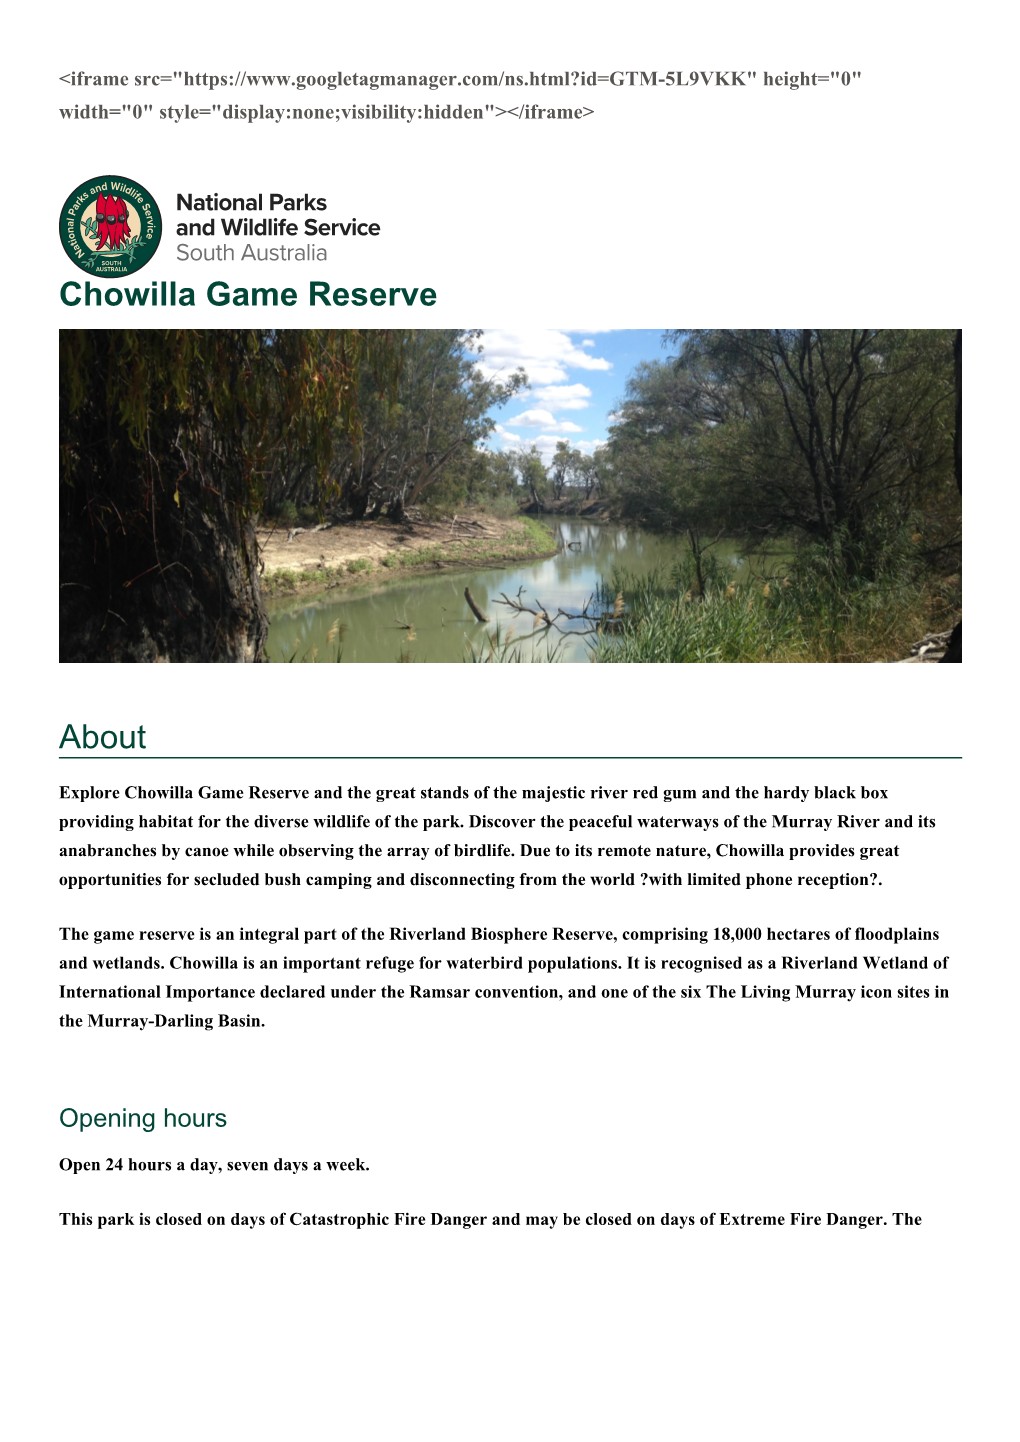 Chowilla Game Reserve About